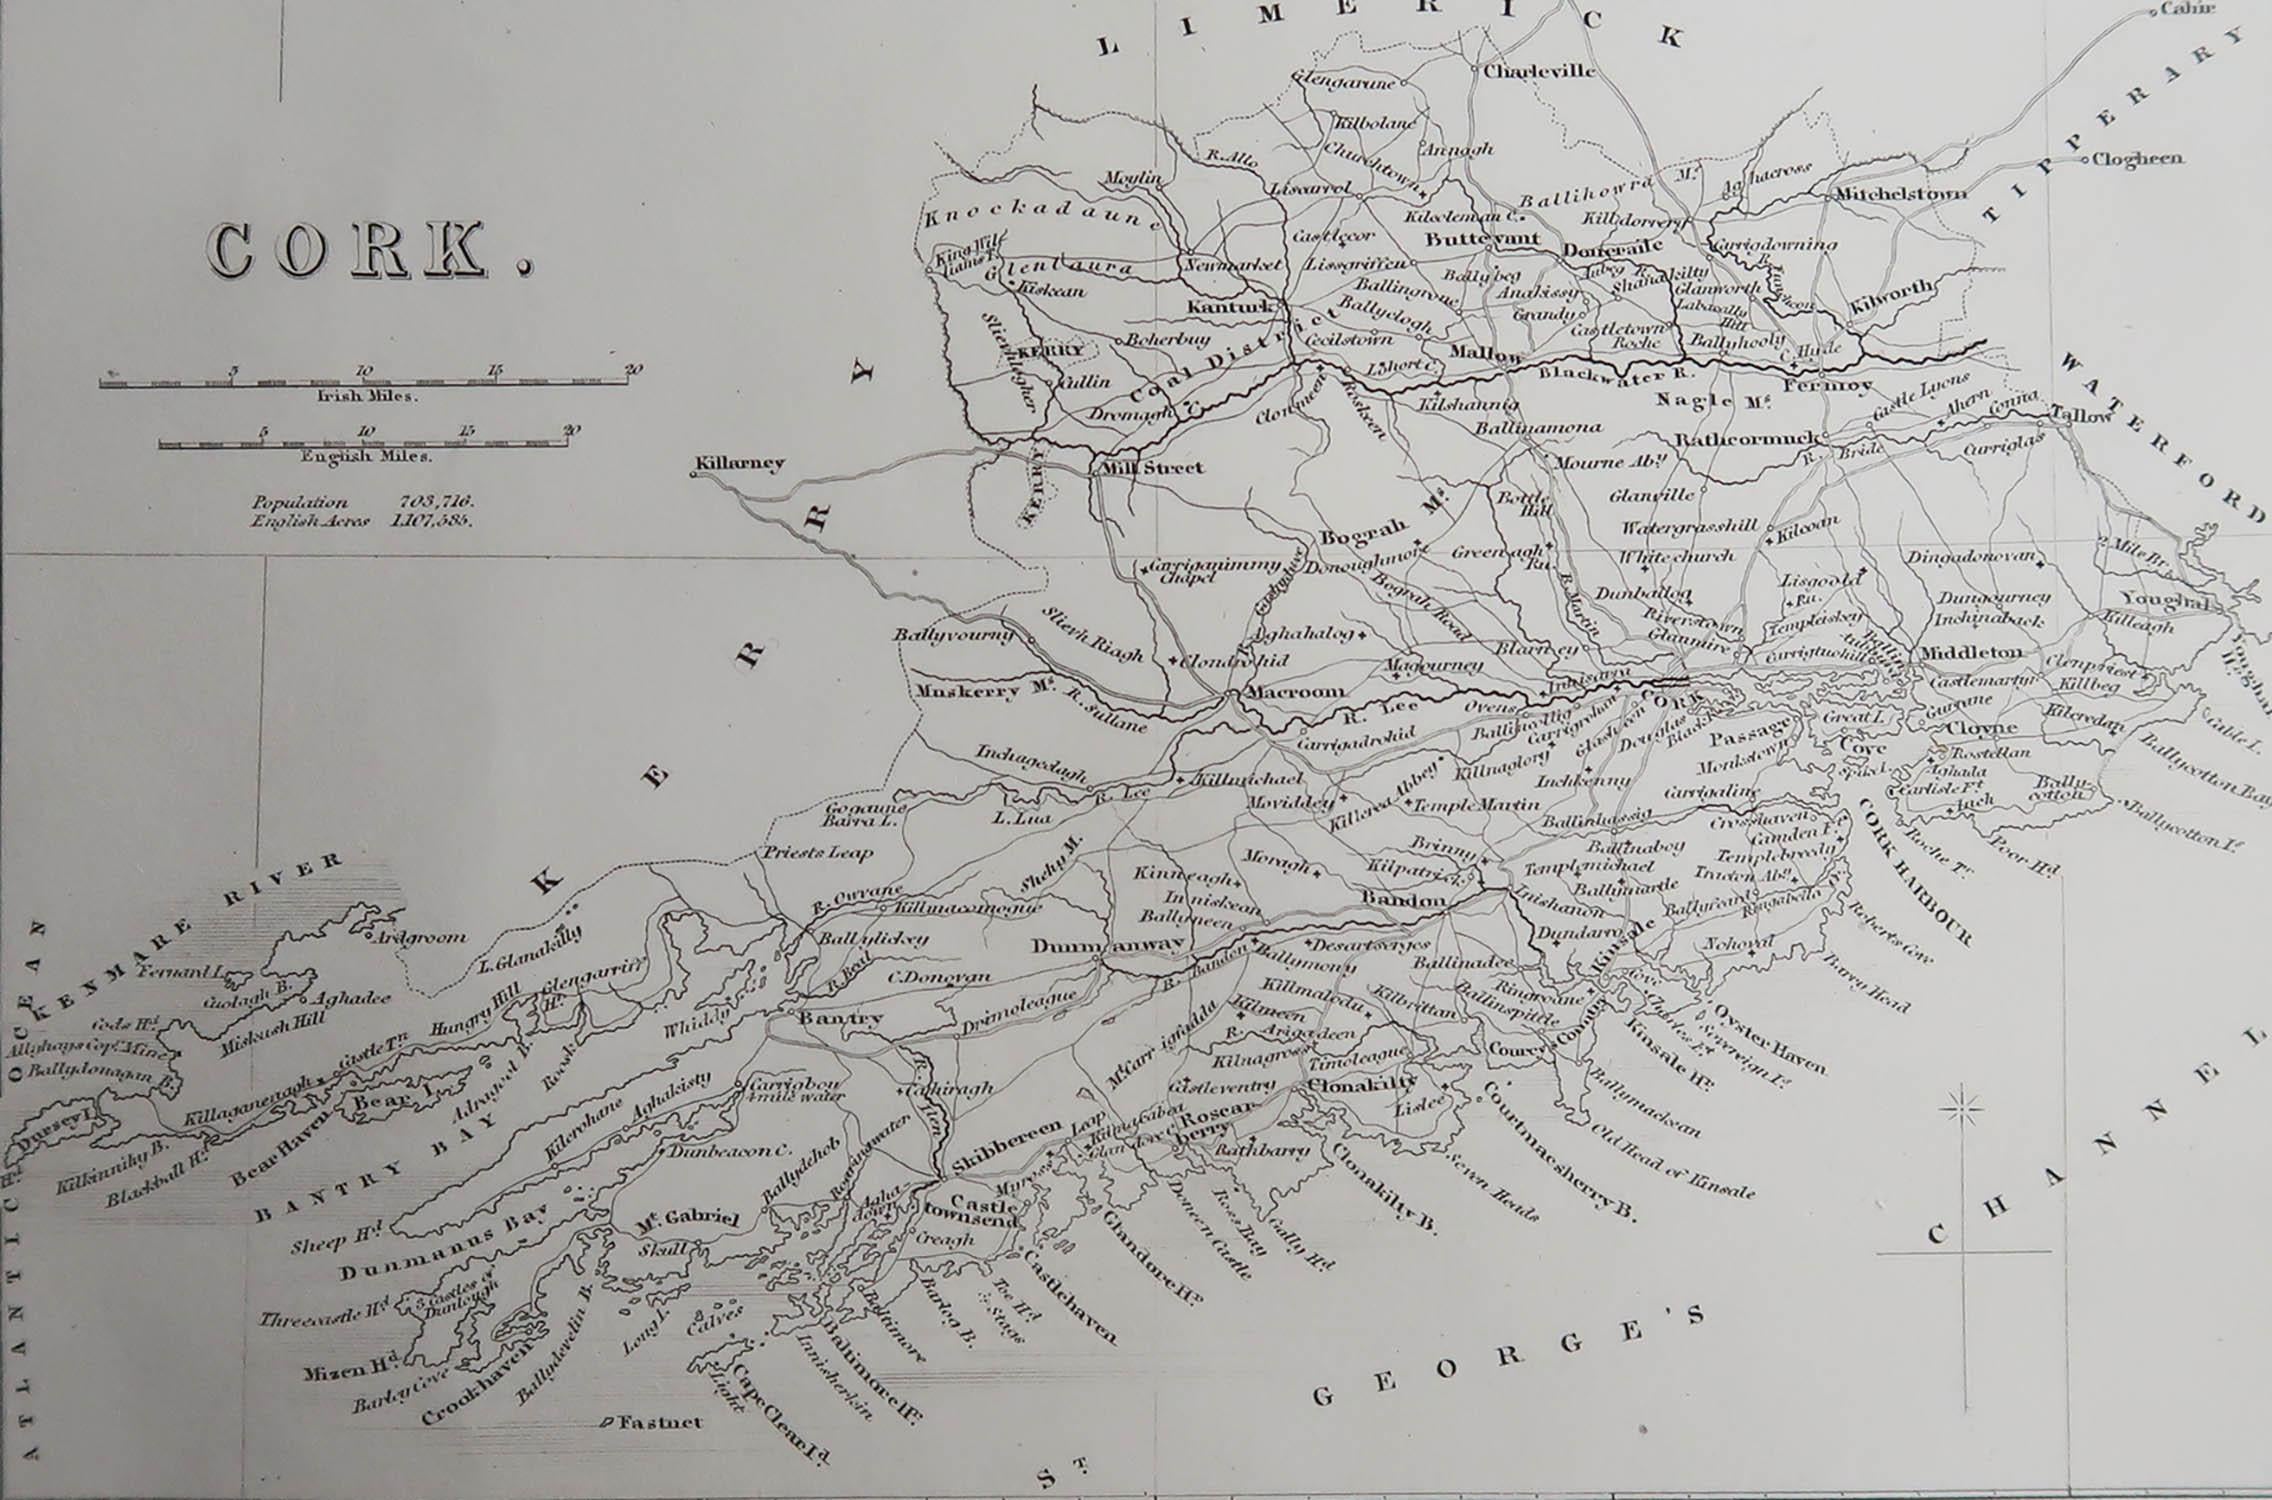 Great map of Cork

Steel engraving

Drawn under the direction of A.Adlard

Published by How and Parsons, C.1840

Unframed.